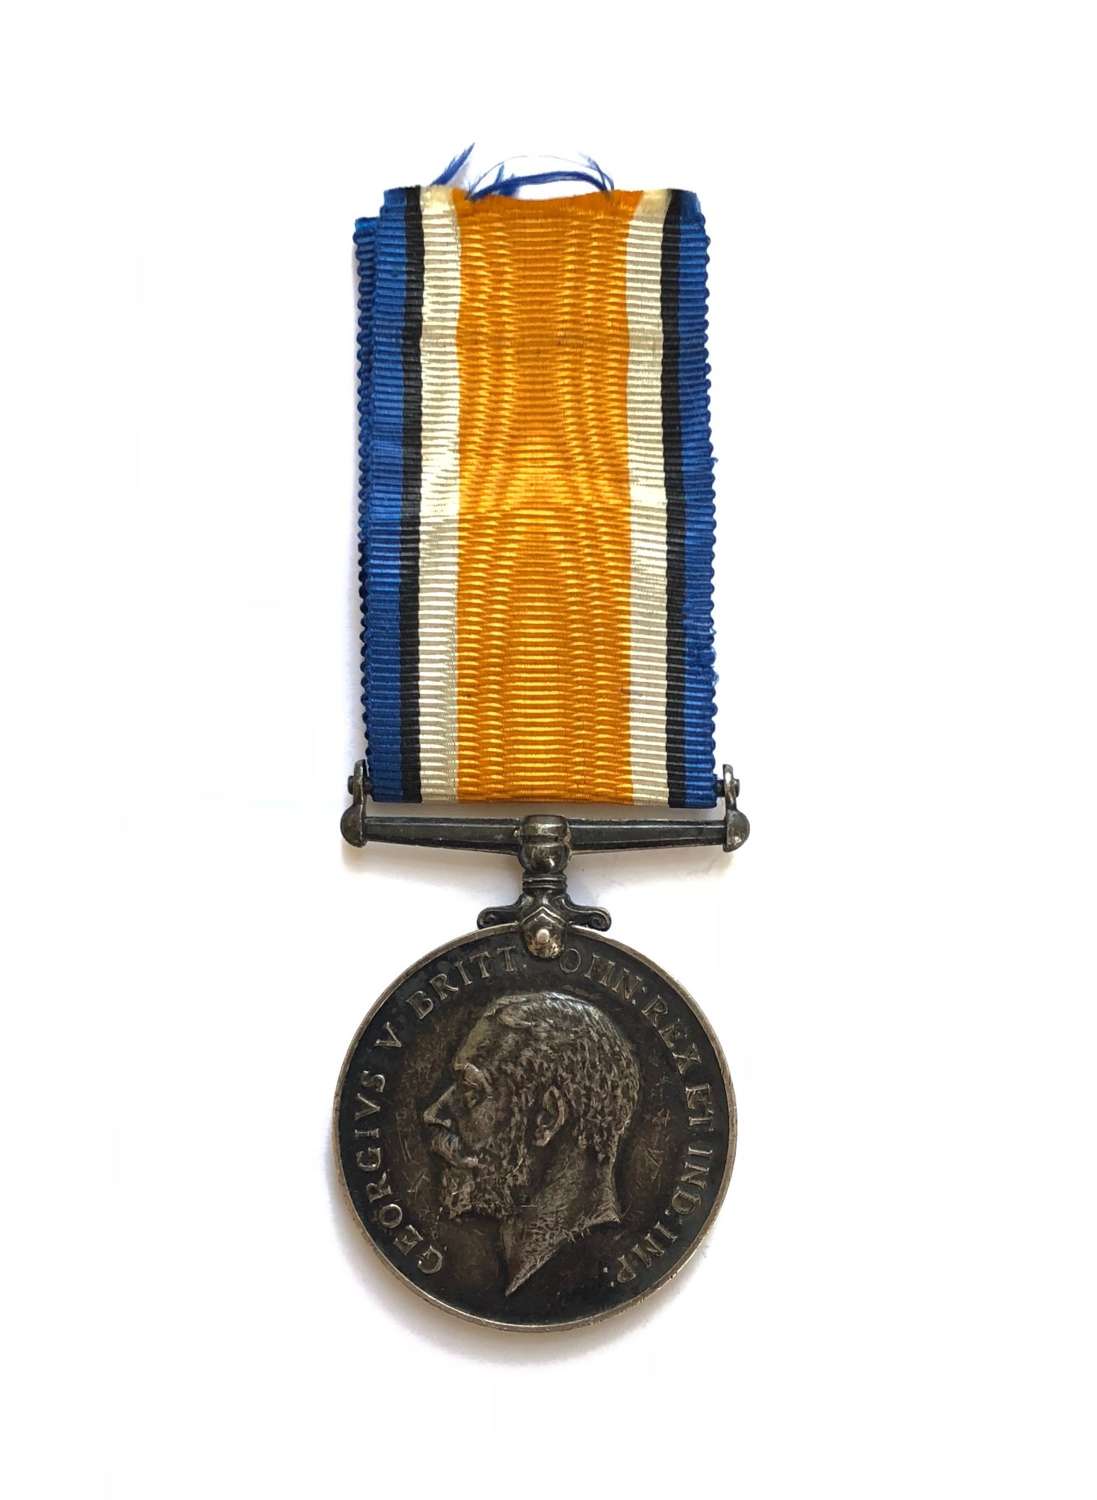 WW1 Royal Dublin Fusiliers British War Medal. Wounded 1917